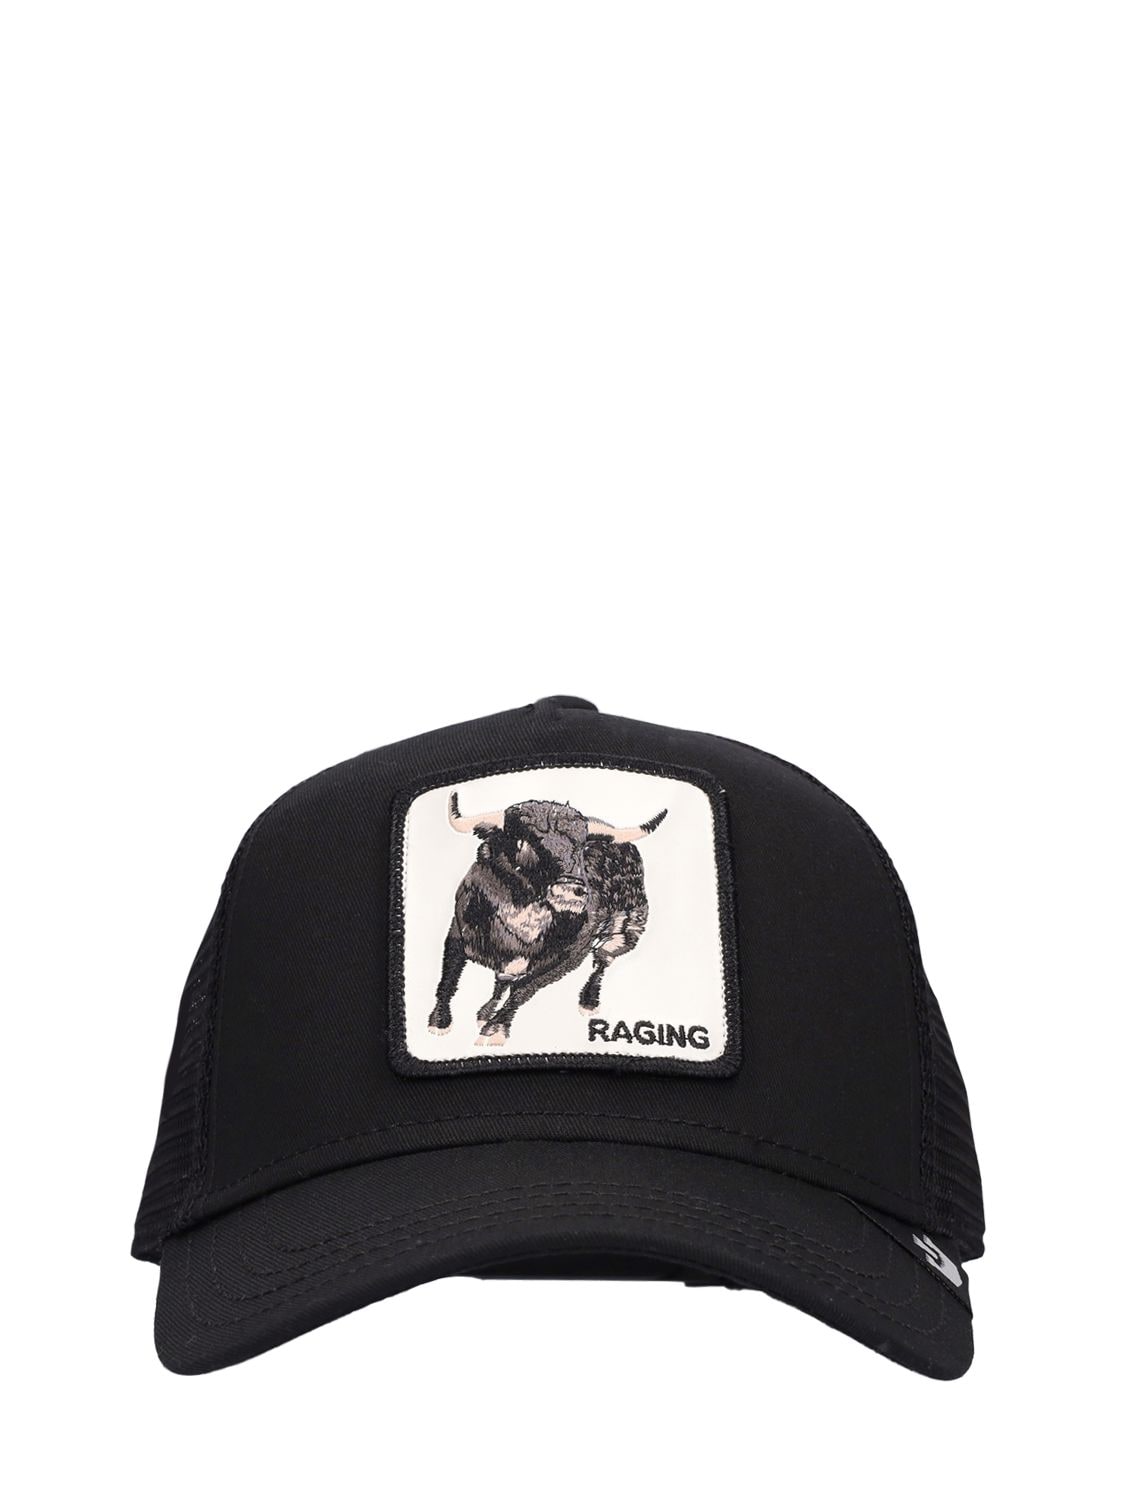 Image of Rager Trucker Hat W/ Patch